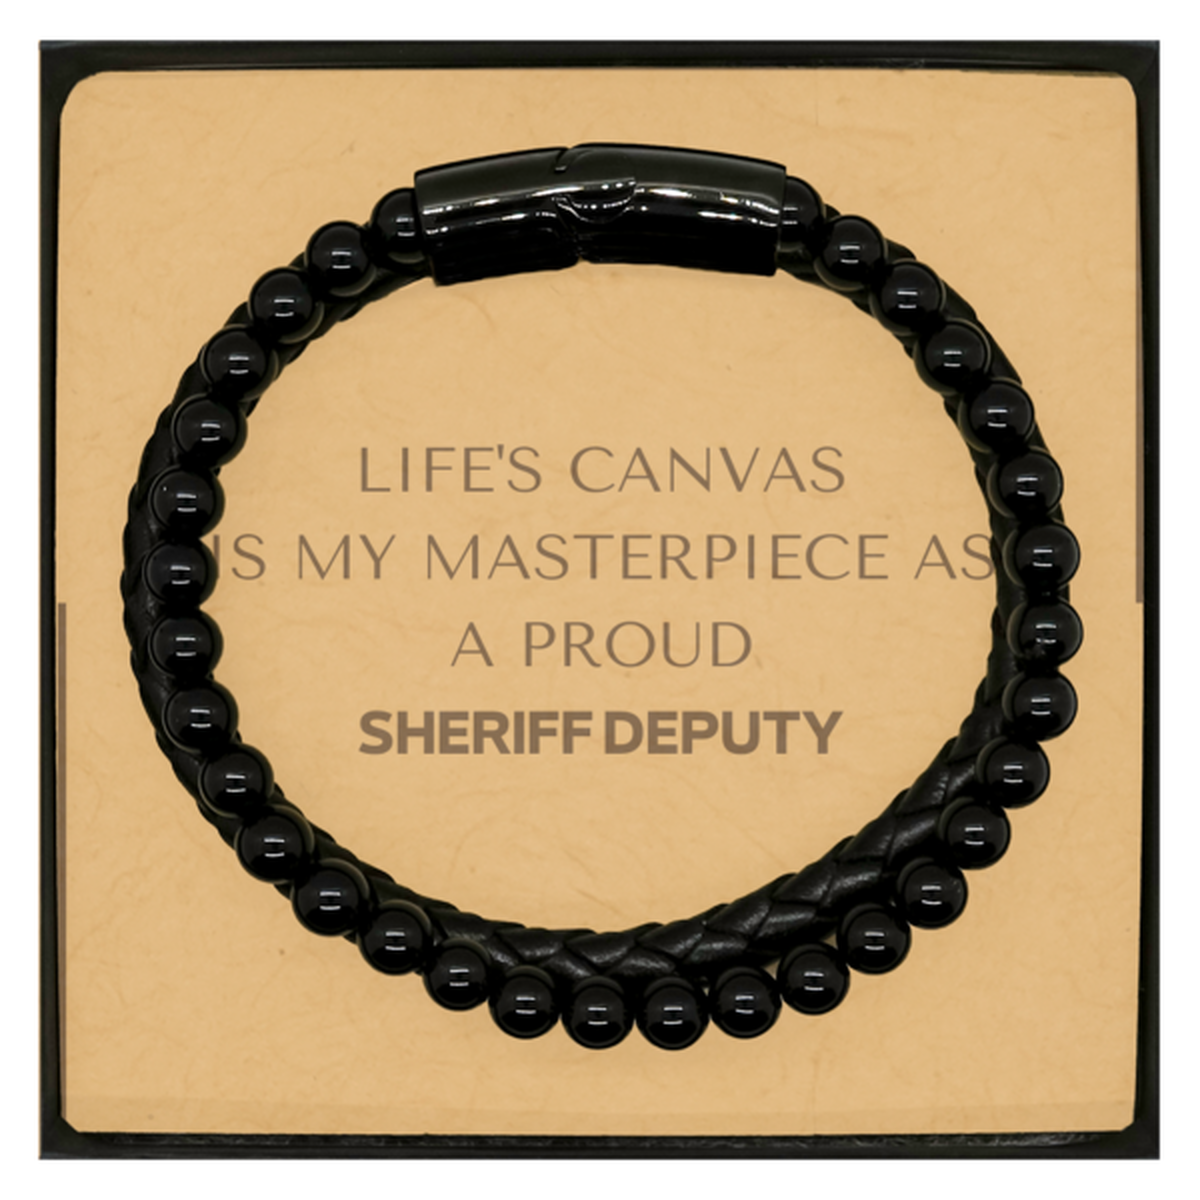 Proud Sheriff Deputy Gifts, Life's canvas is my masterpiece, Epic Birthday Christmas Unique Stone Leather Bracelets For Sheriff Deputy, Coworkers, Men, Women, Friends